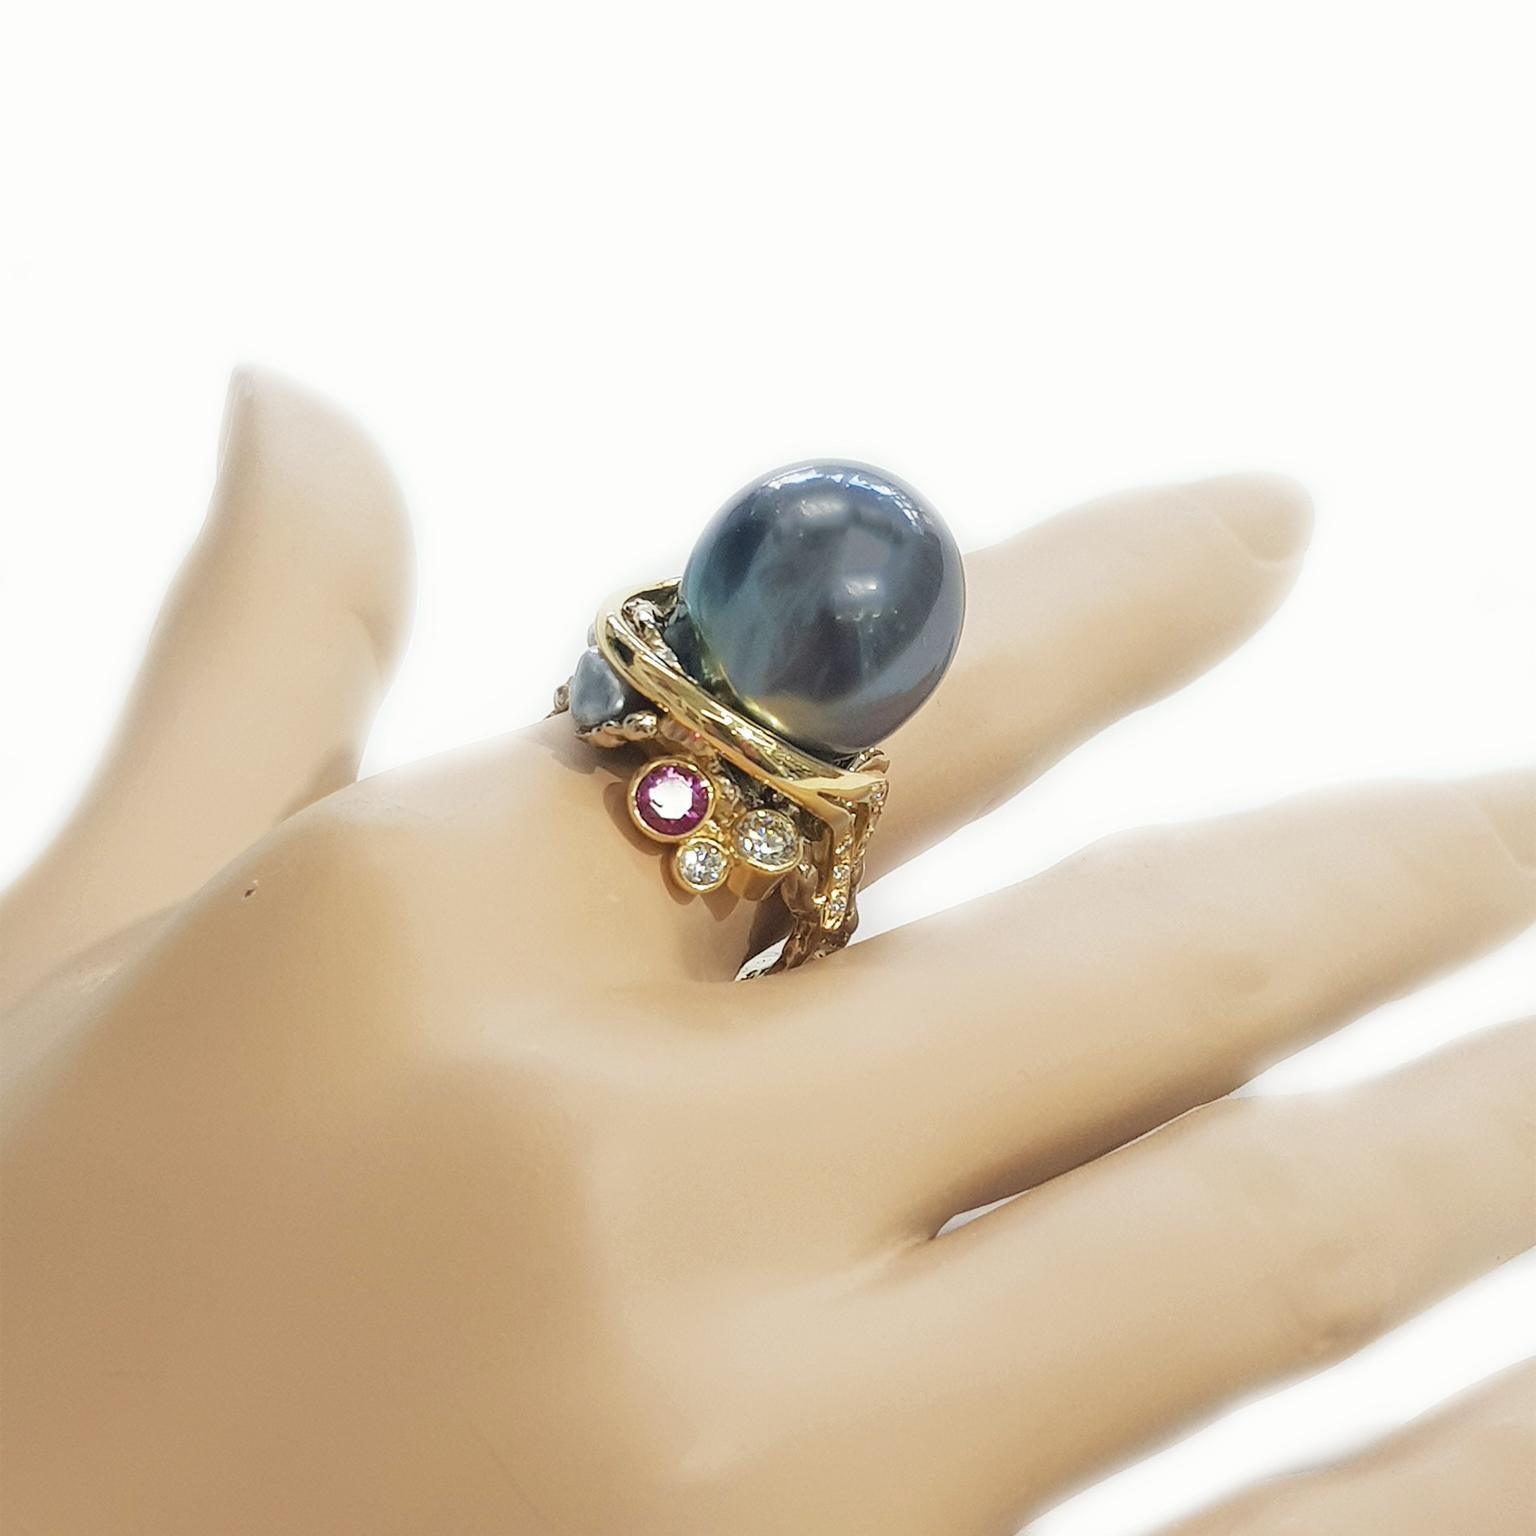 Discover a masterpiece of fine jewellery, the “twilight” Black Pearl Ring meticulously handcrafted by the renowned multi award winning Australian jeweller, Paul Amey.  

At “Twilight’s” heart you will find a captivating natural black South Sea pearl